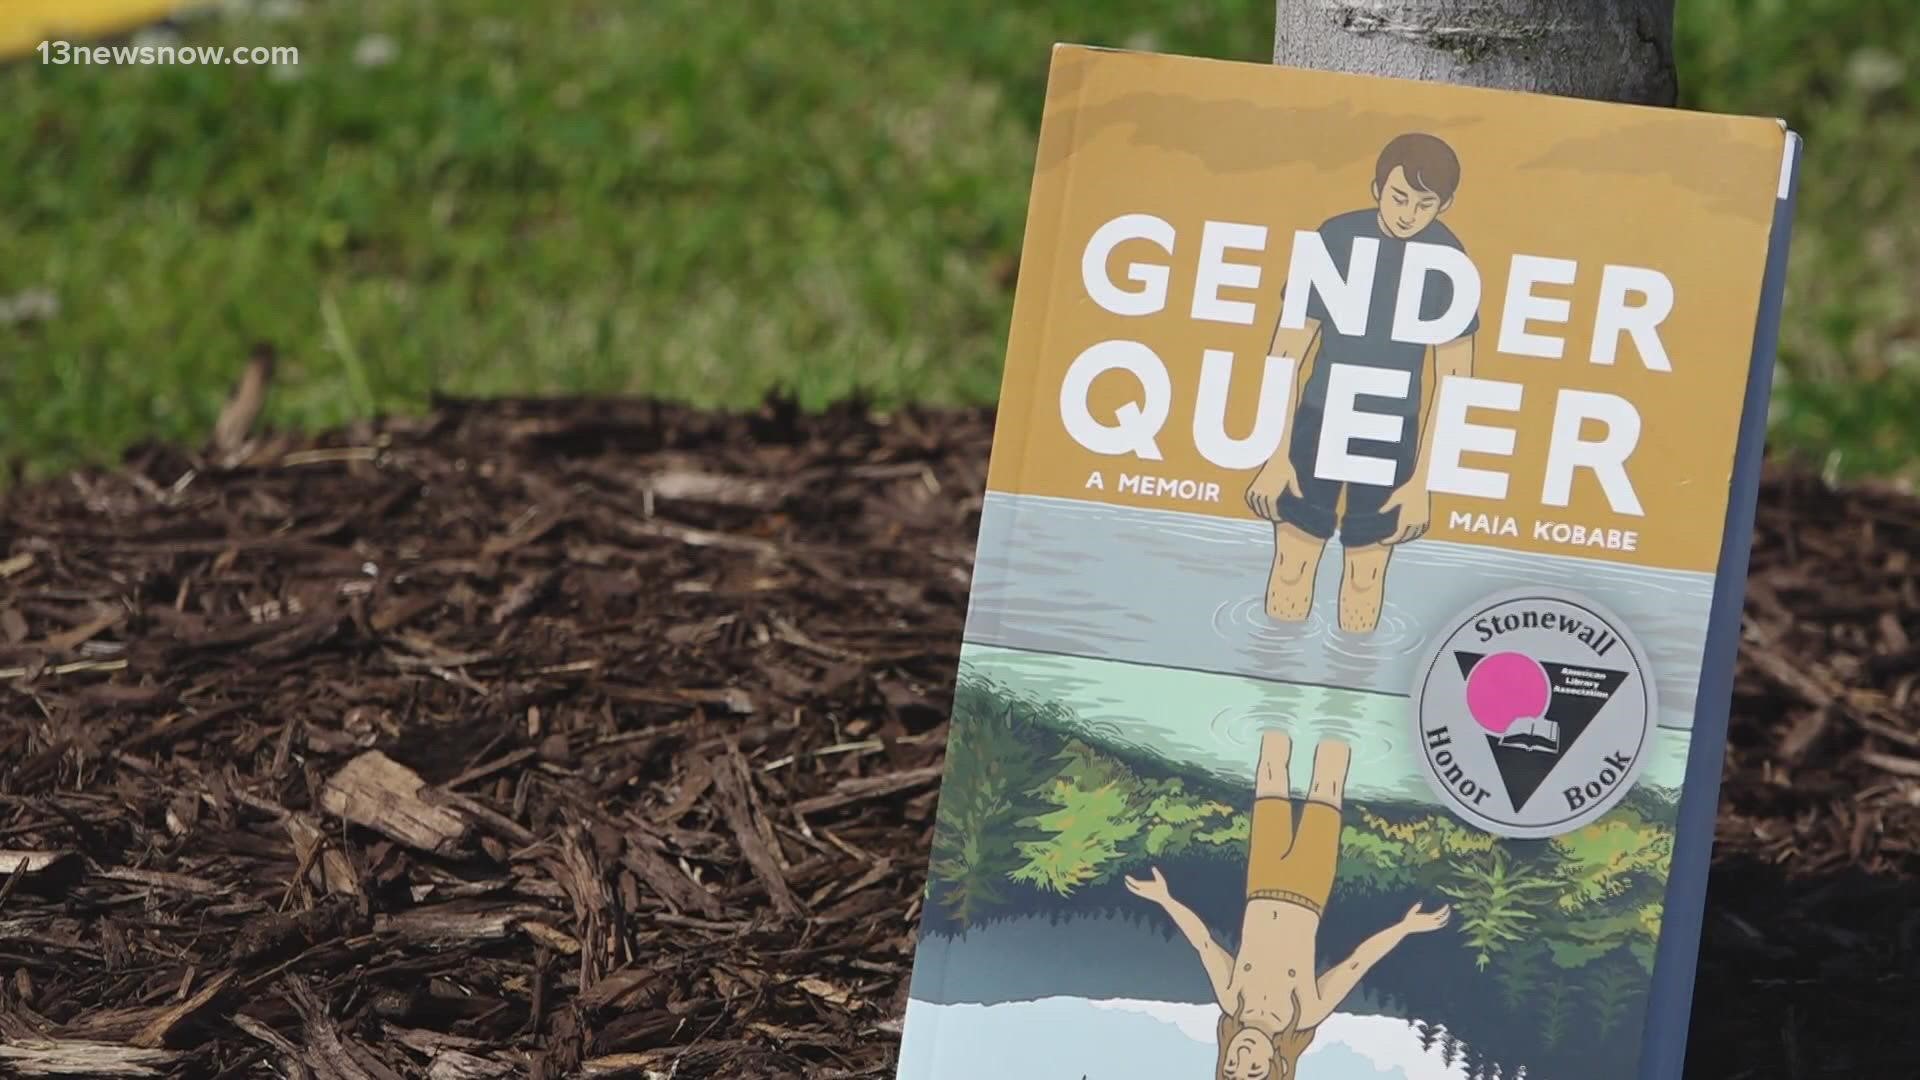 Delegate and attorney Tim Anderson filed suit back in May over two books: "Gender Queer" and "A Court of Mist and Fury."